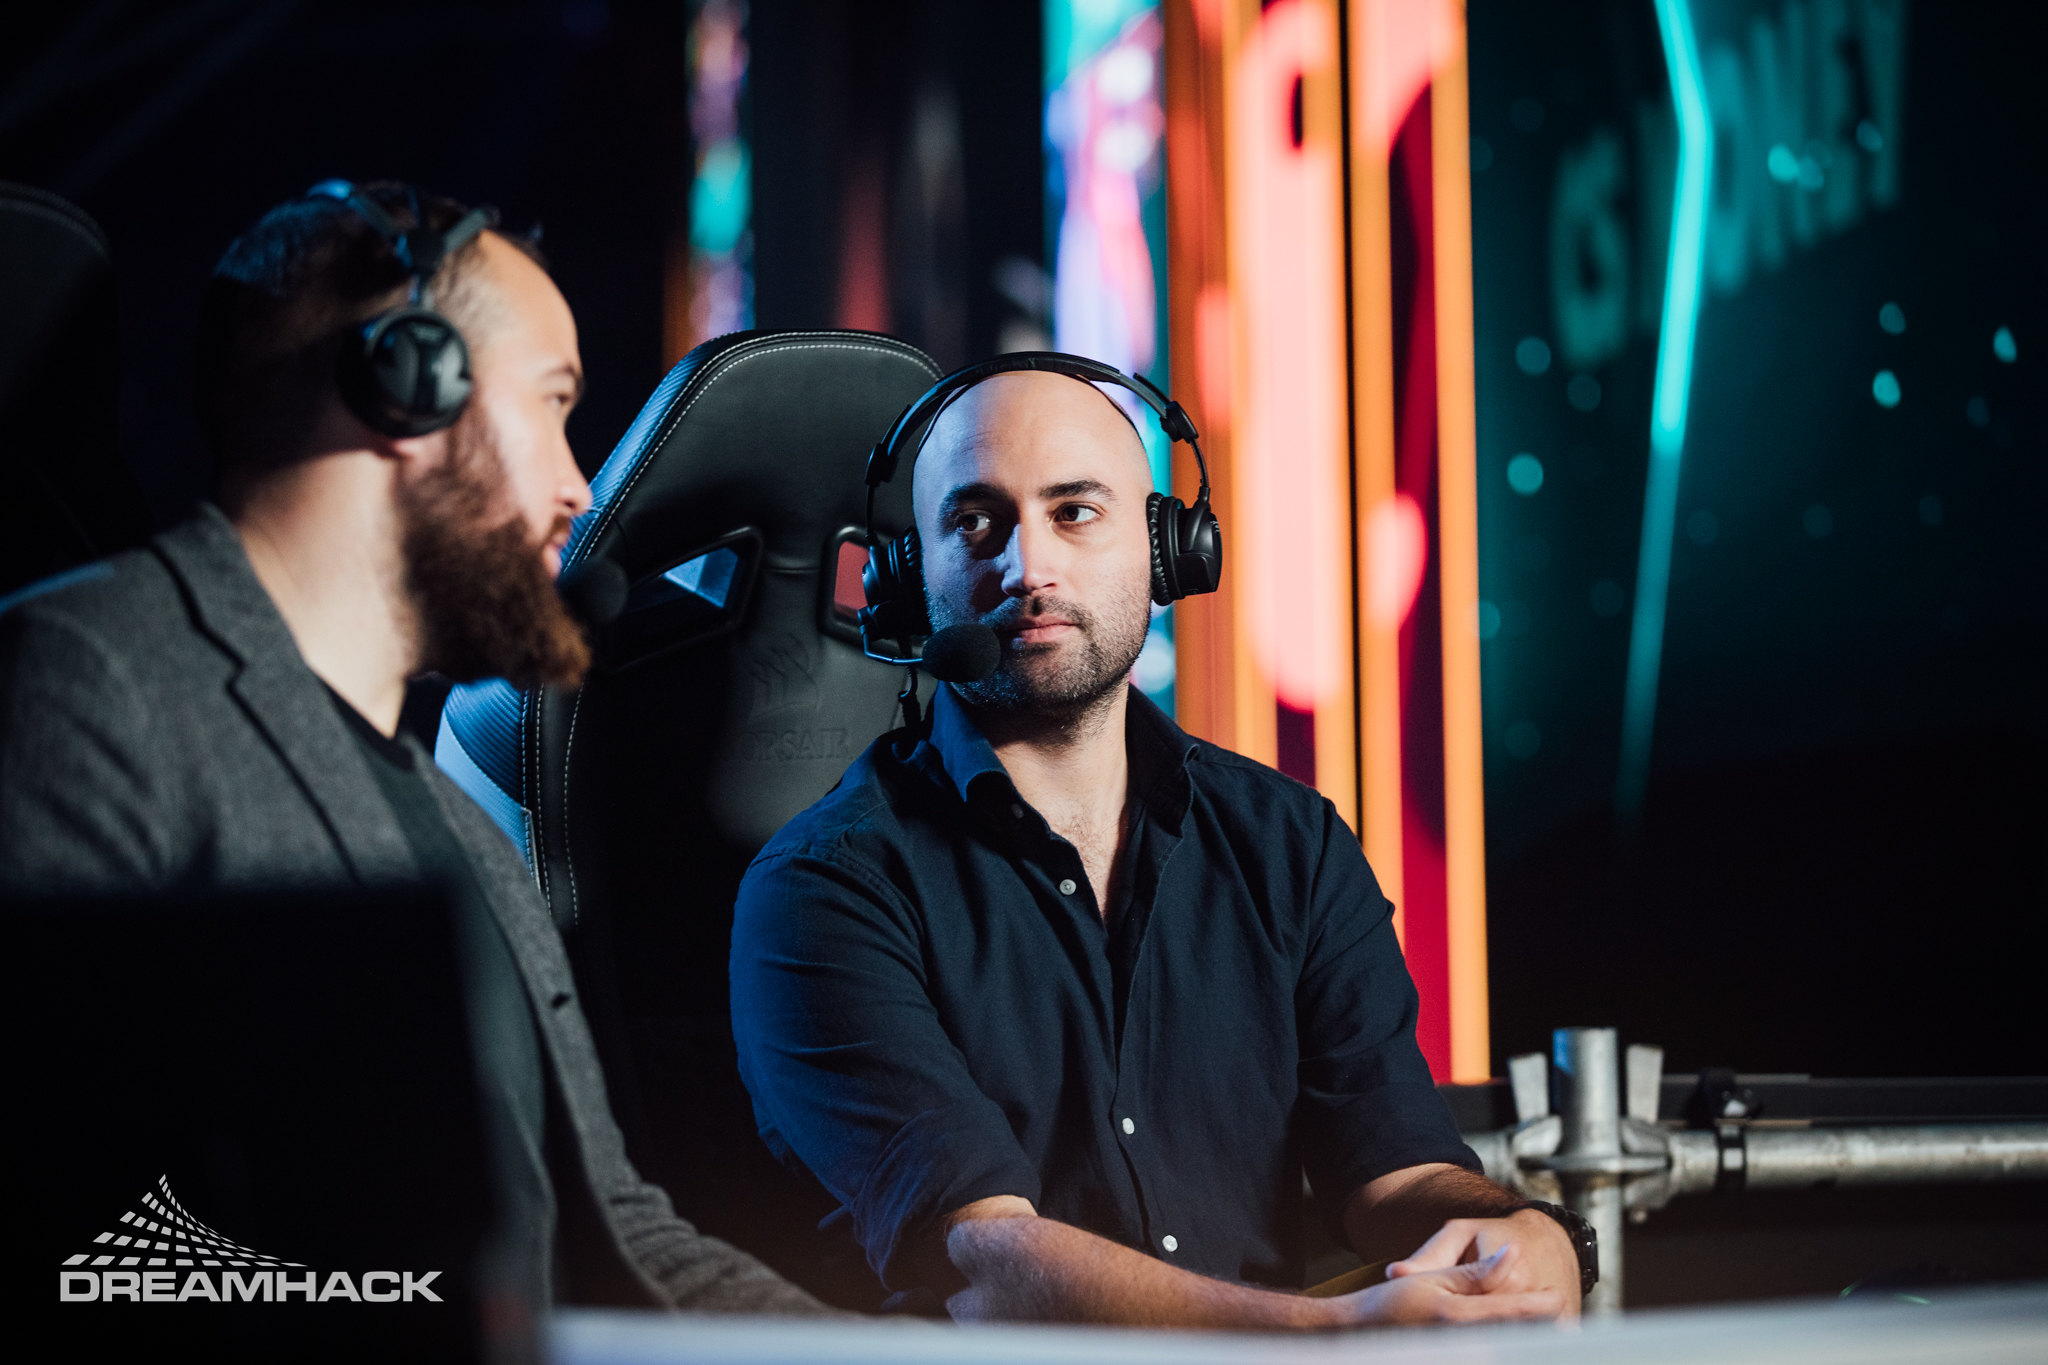 moses-dreamhack1